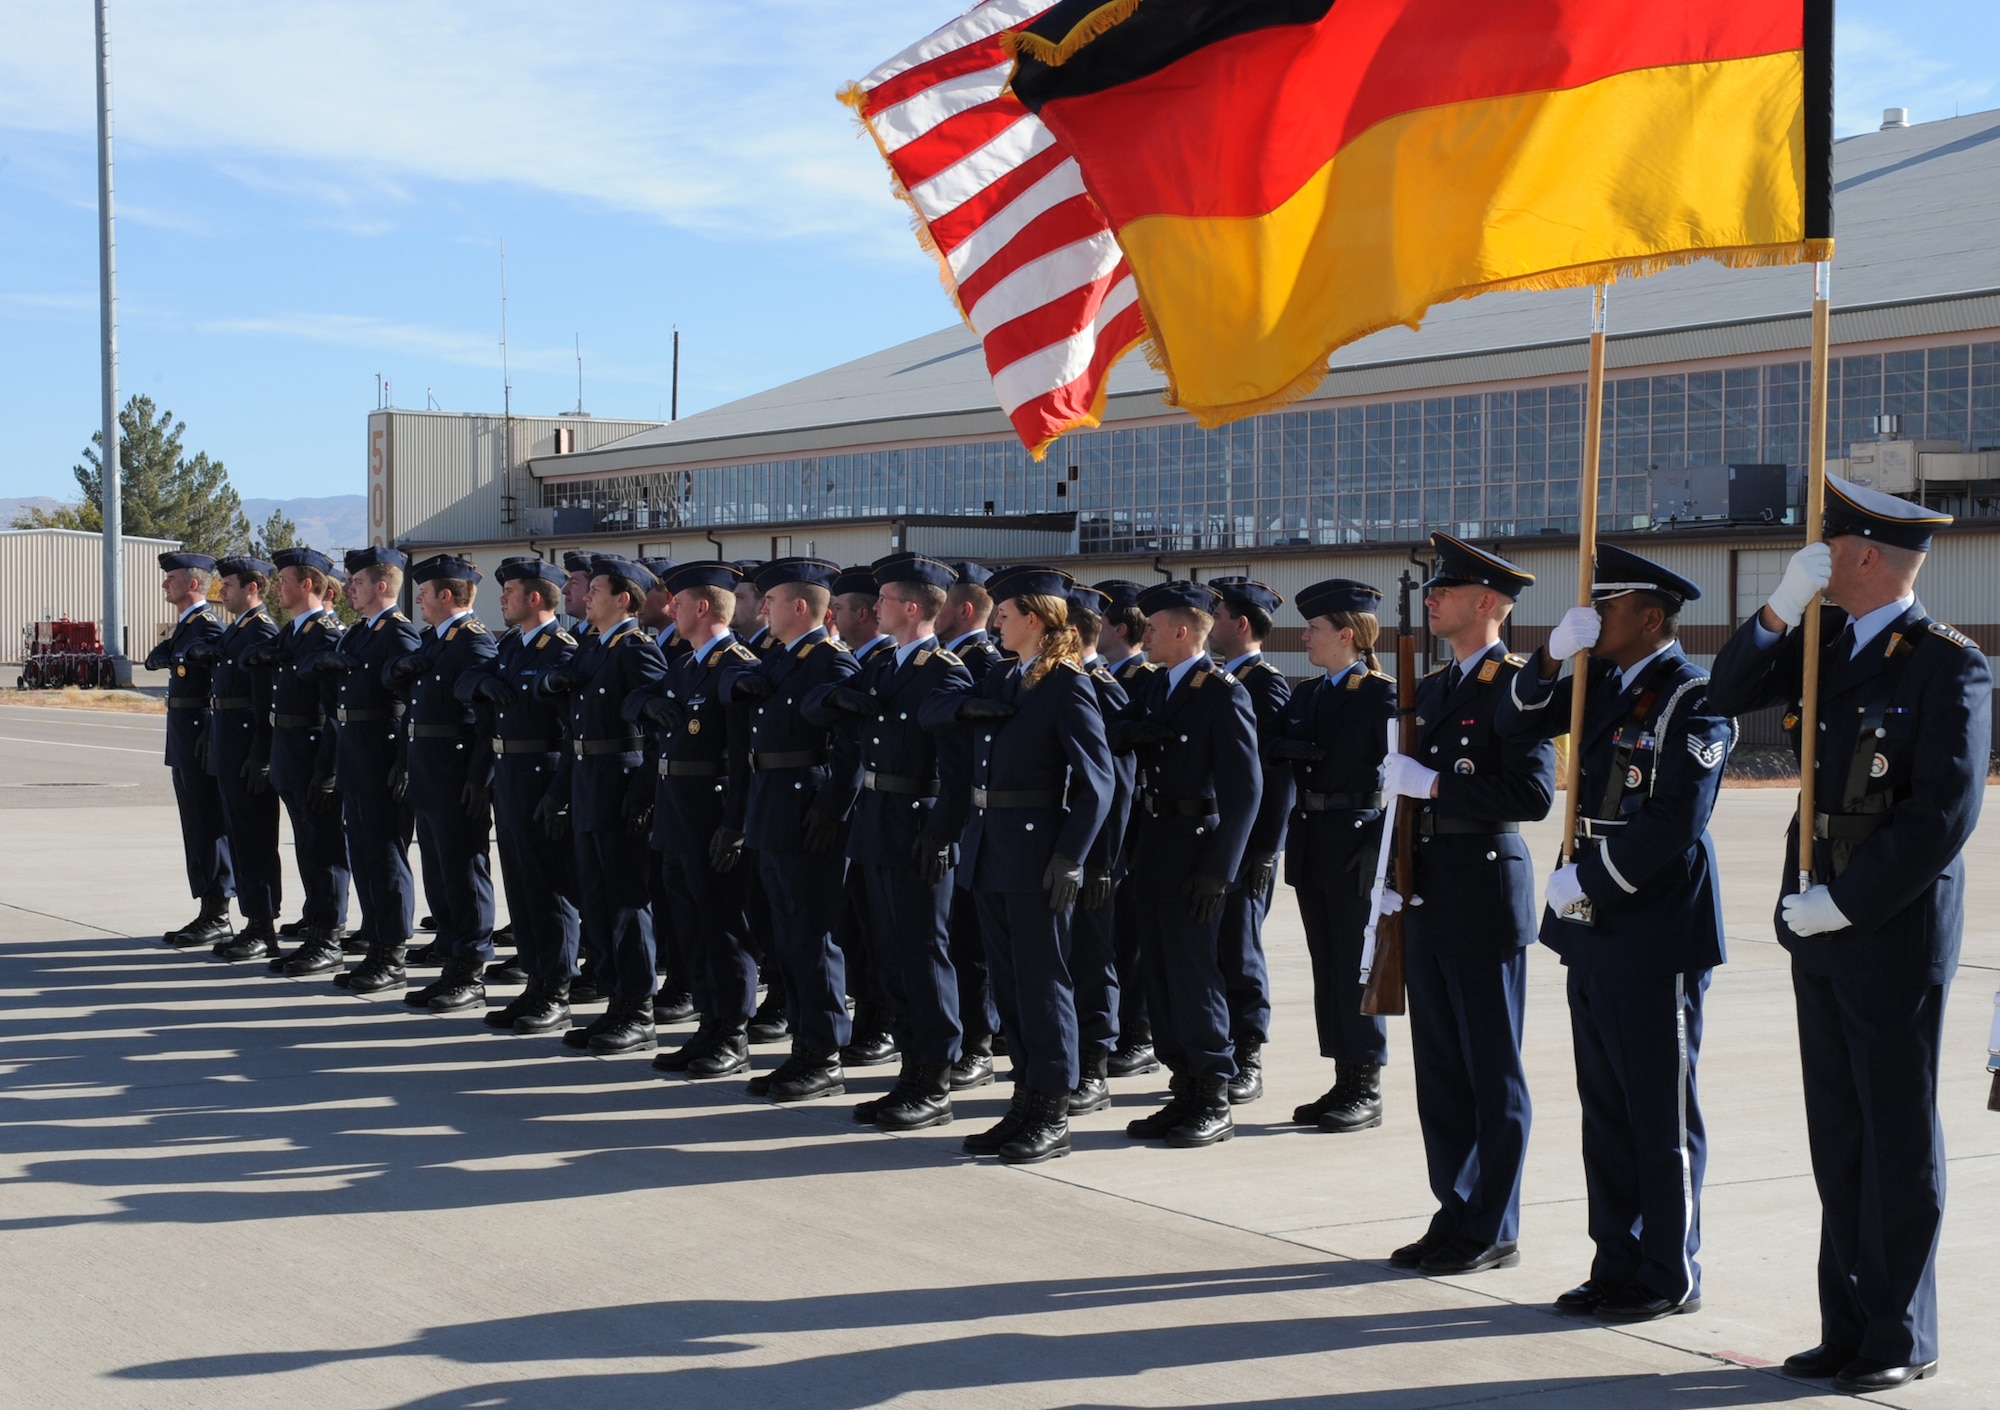 Airmen from the 49th Fighter Wing and the German Air Force Flying Training Center, wait for the arrival of Minister Franz Josef Jung, German Minister of Defense, at Holloman Air Force Base, N.M., Nov. 24. Minister Jung came to visit Holloman to see the German Air Force Flying Training Center. The German air force has been training its aircrews throughout the United States since 1958 before it was moved to Holloman in 1992. (U.S. Air Force photo/Airman 1st Class Michael Means)